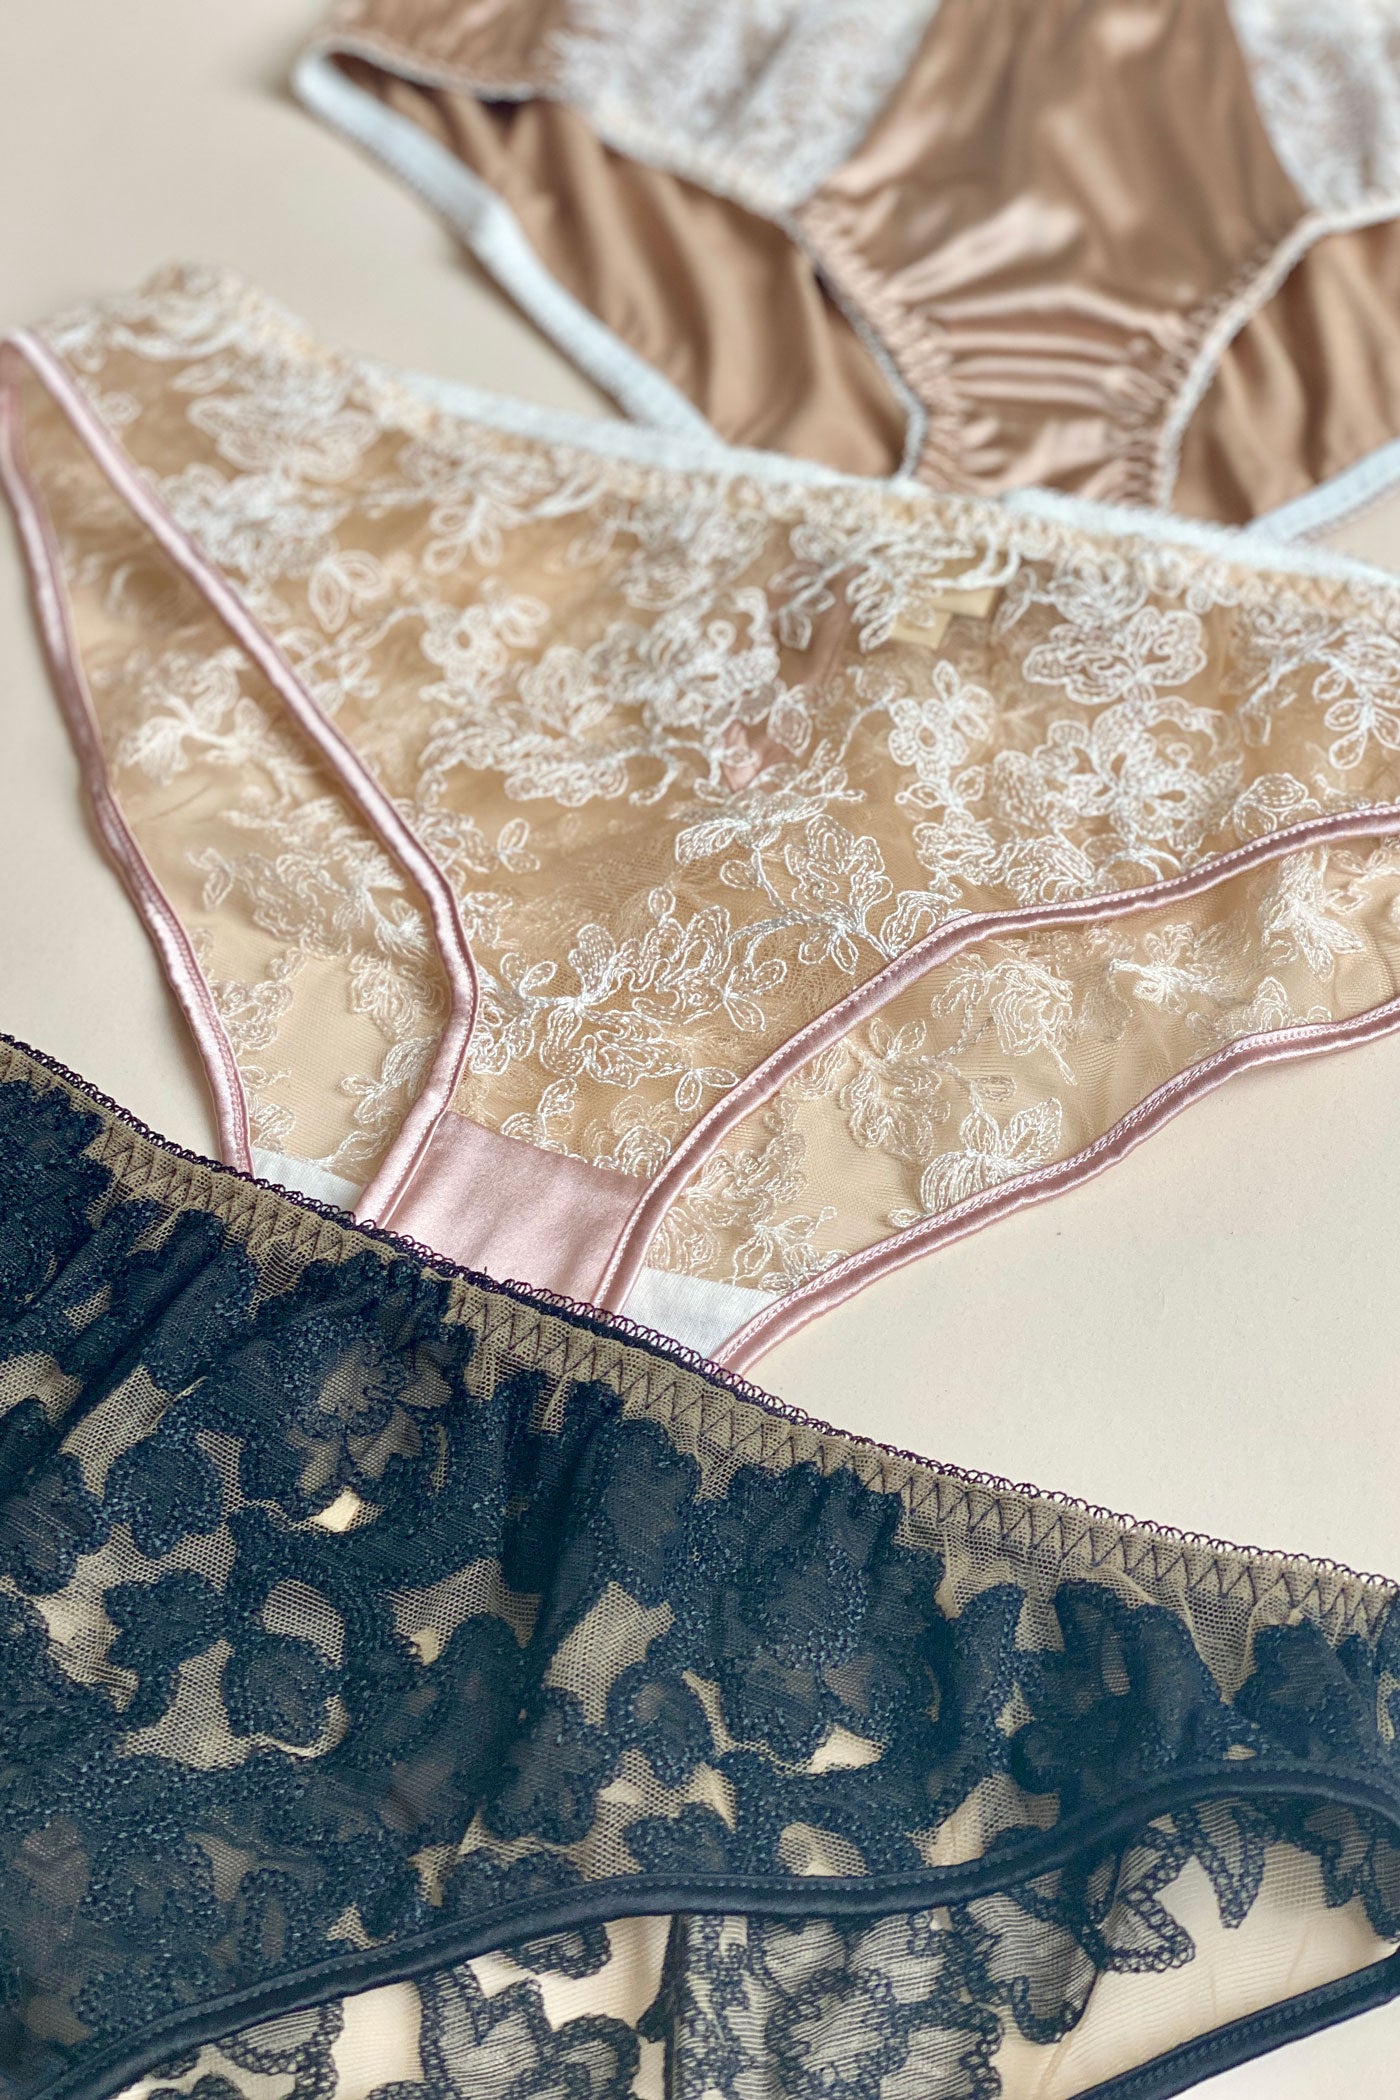 Closeup of sheer embroidery in luxury 3 knicker set